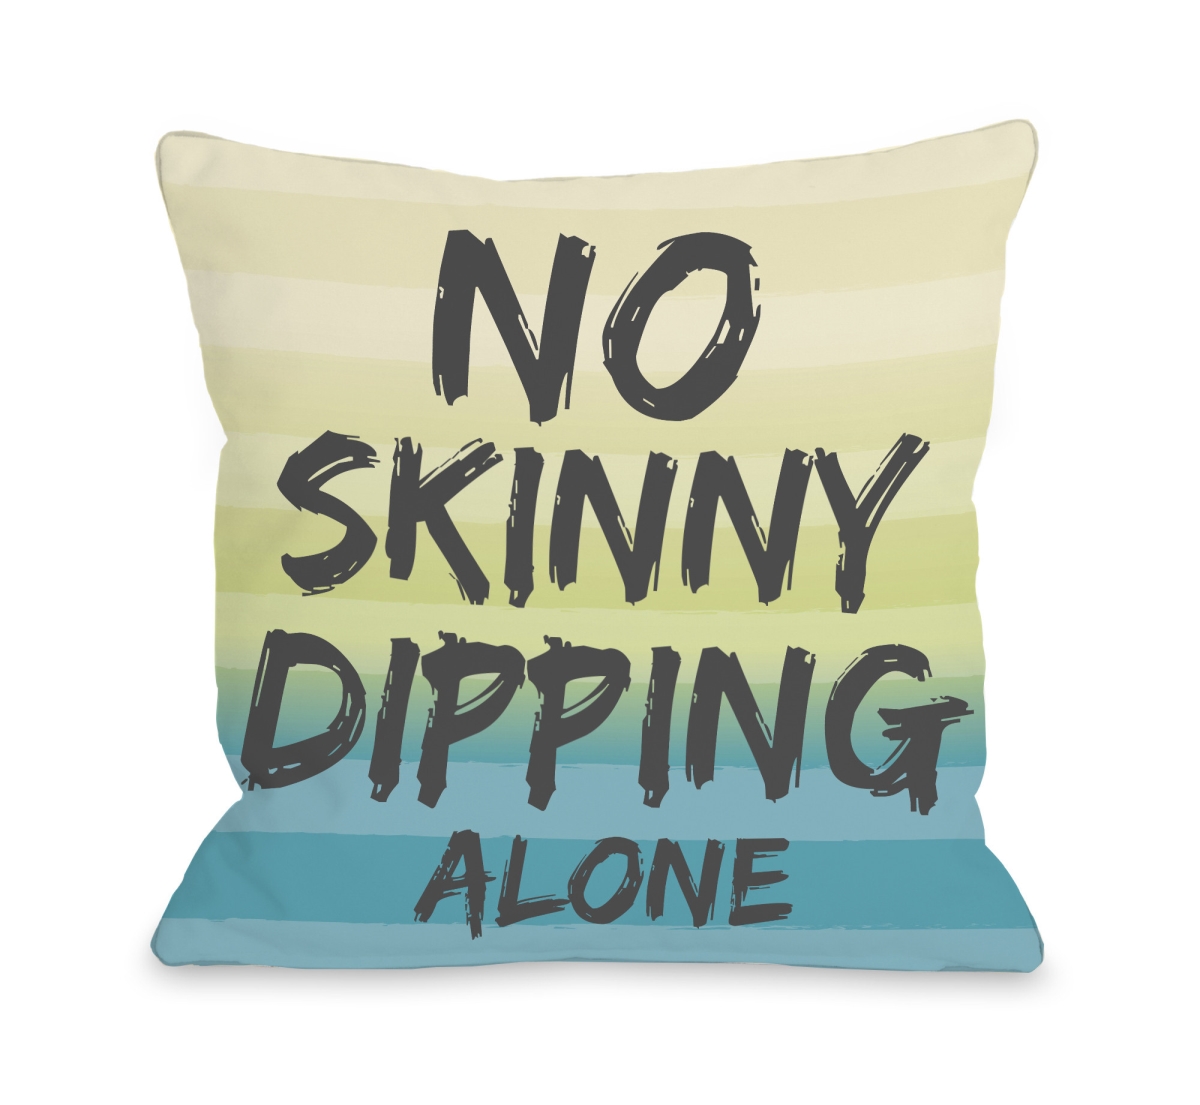 72236pl16 16 X 16 In. No Skinny Dipping Alone Pillow, Turquoise & Multicolor